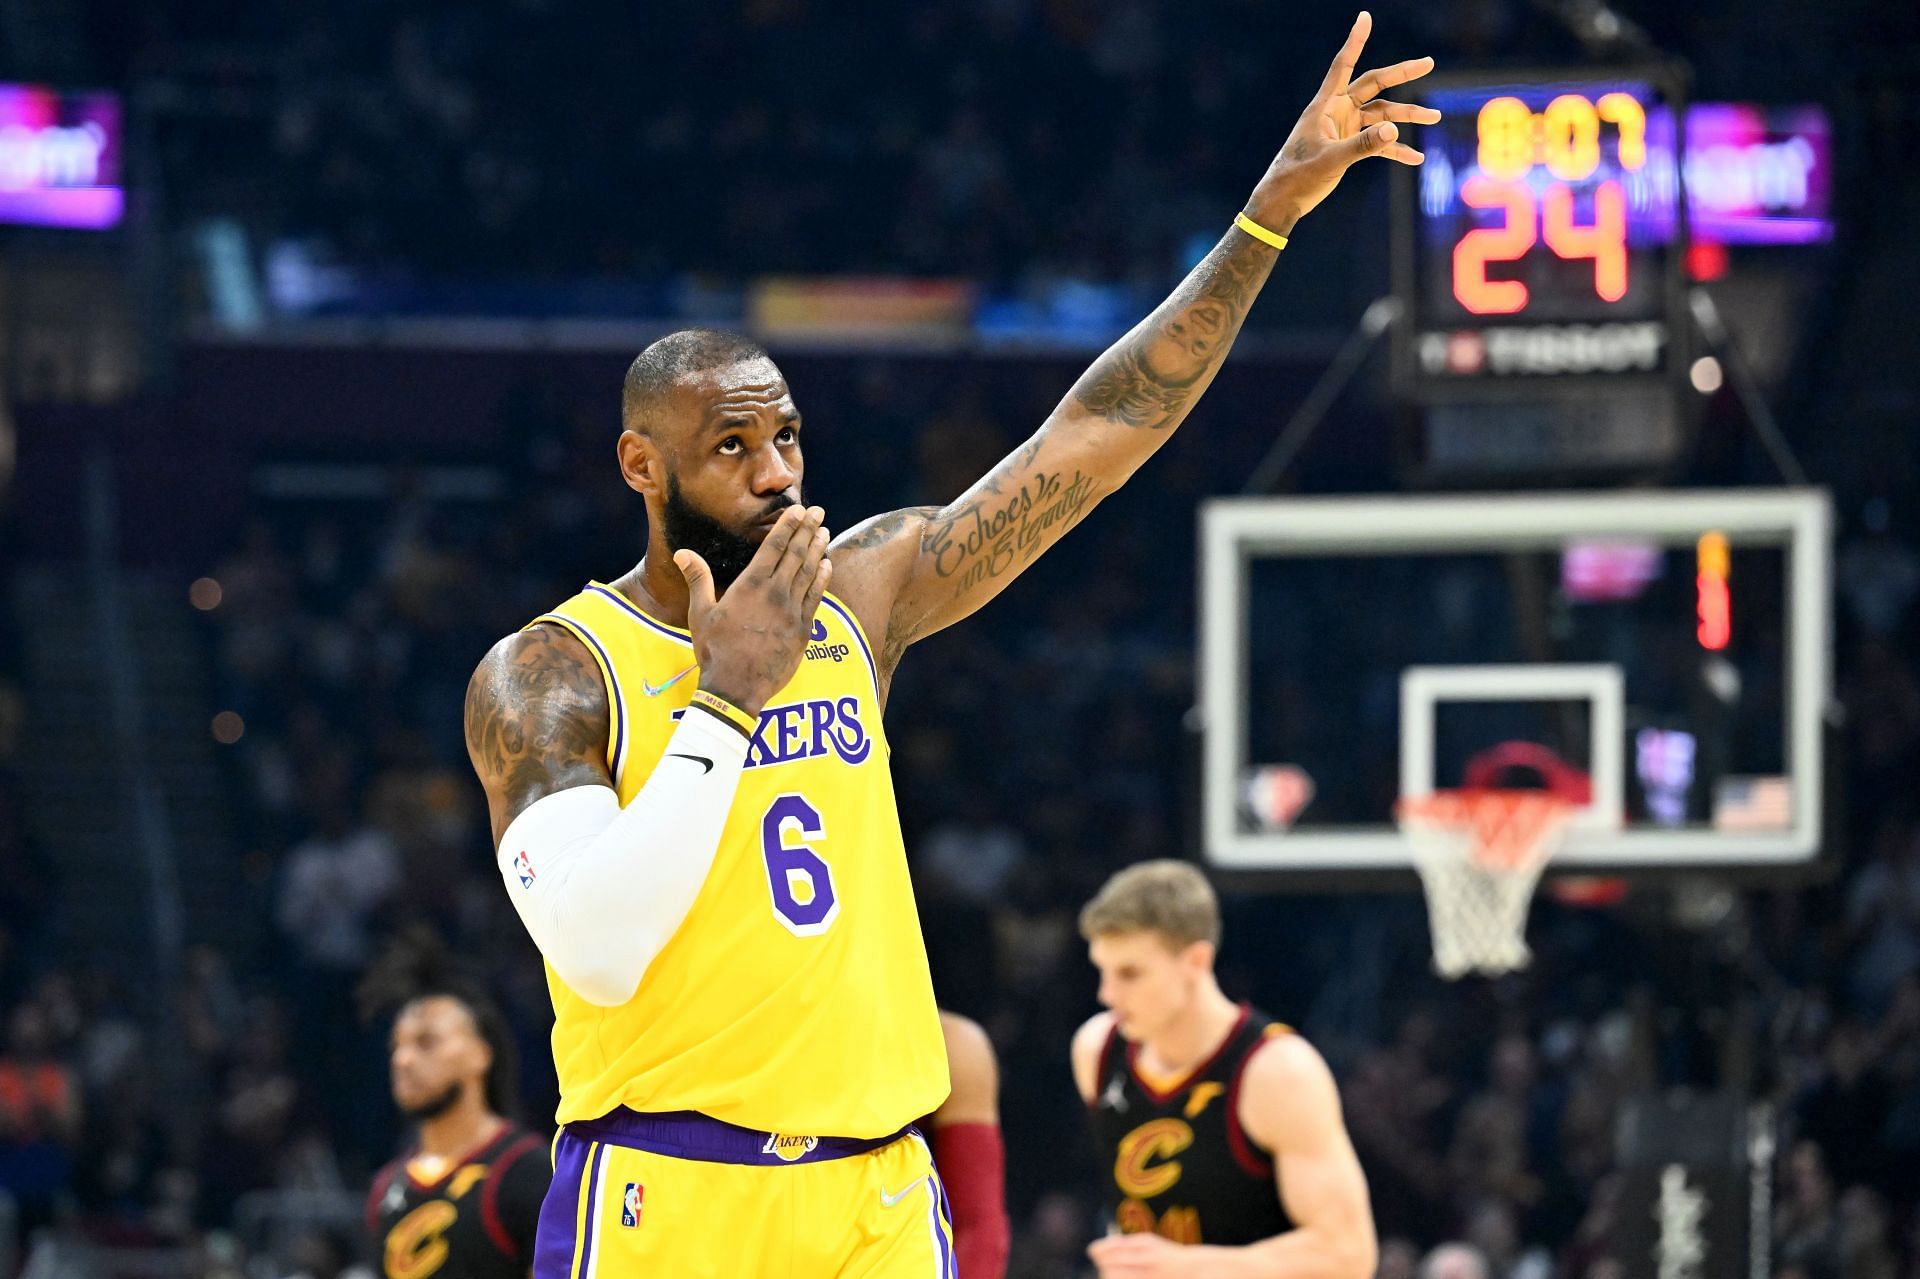 LeBron James of the LA Lakers waves to the Cleveland fans at Rocket Mortgage Fieldhouse